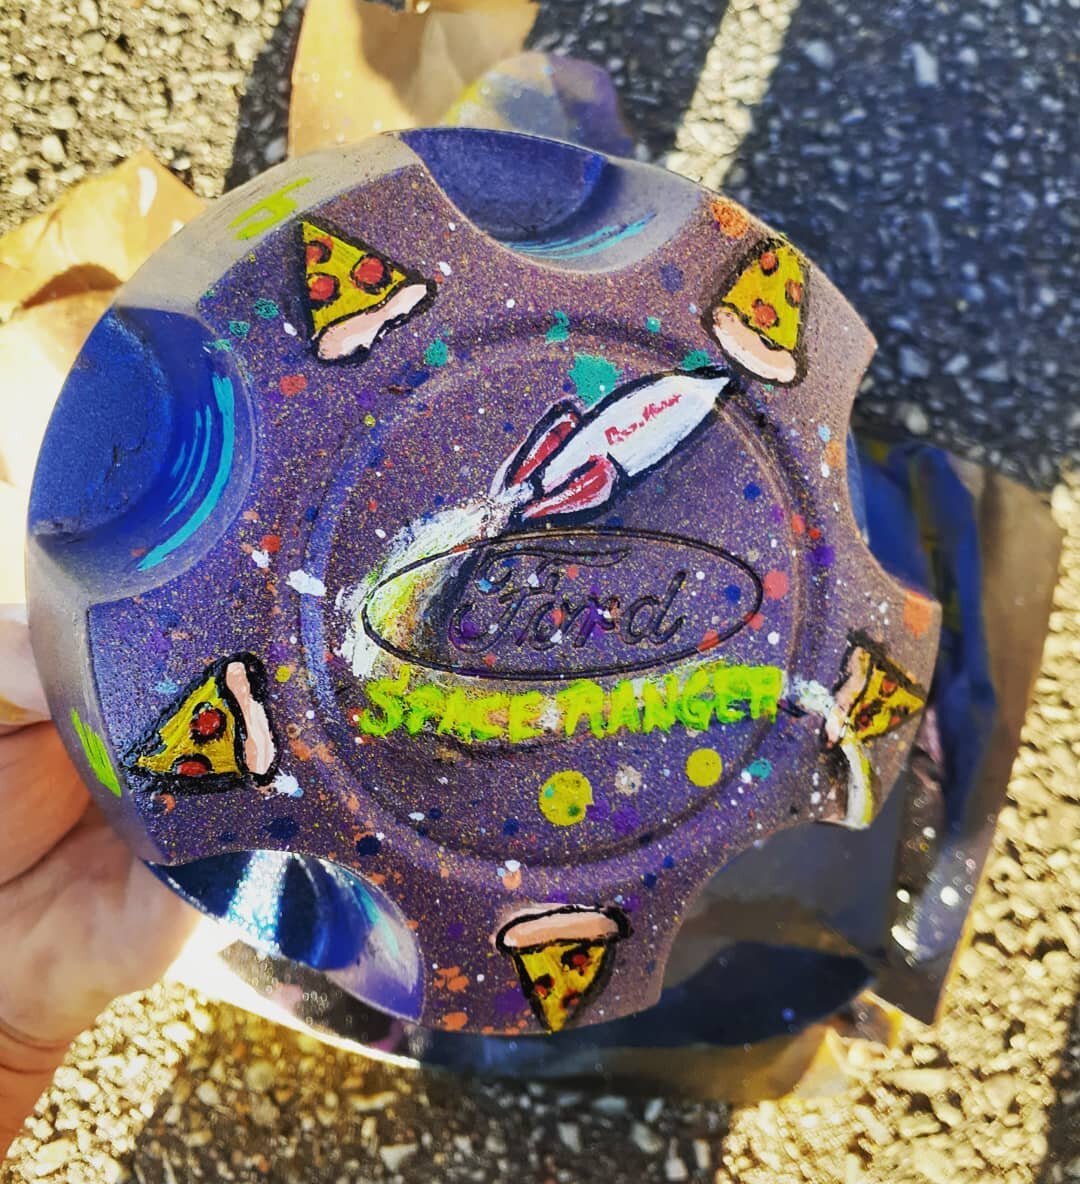 Proof I'll paint just about anything.

Hubcap for @j.earthdweller 

#mwcc #pizza #toystory #pizzaplanet #spaceranger #rocket #spaceart #spacecadet #pizzainspace #fordranger #pghartist #kaidevenitch #mostwantedcarclub #spacey #rocketsaway #toinfinitya